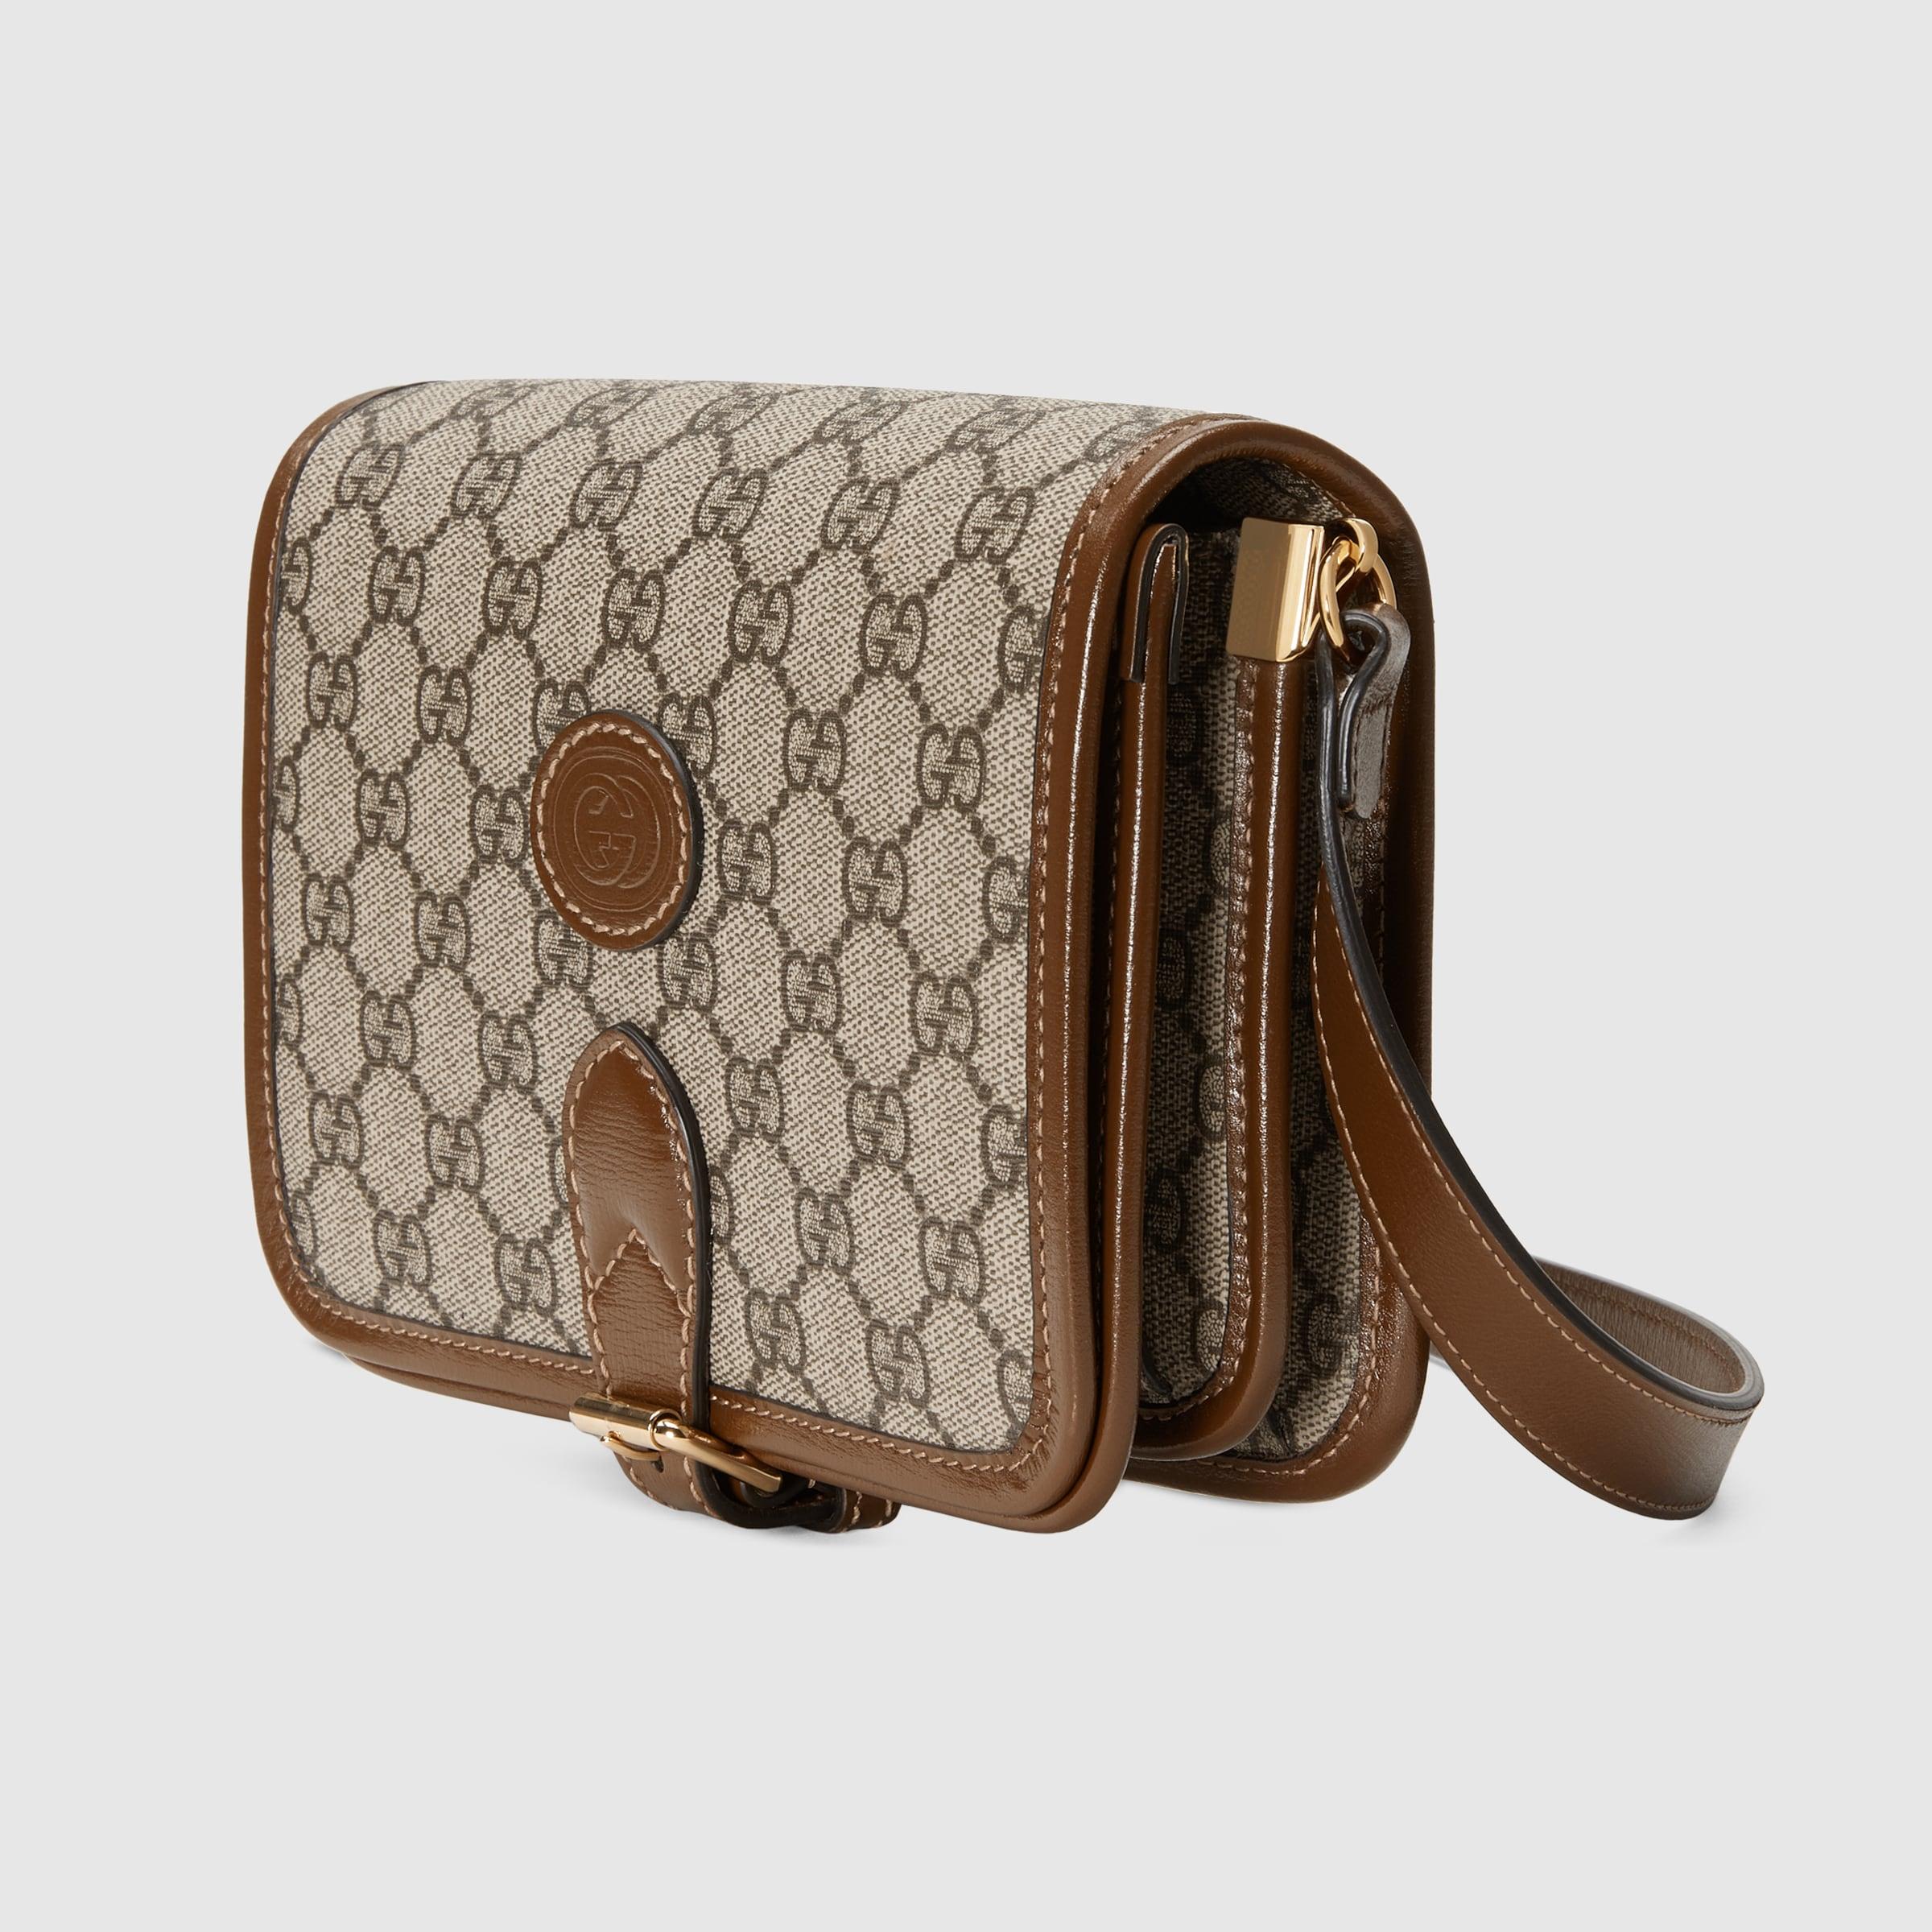 Gucci Messenger Bag With Interlocking G In Beige And Ebony